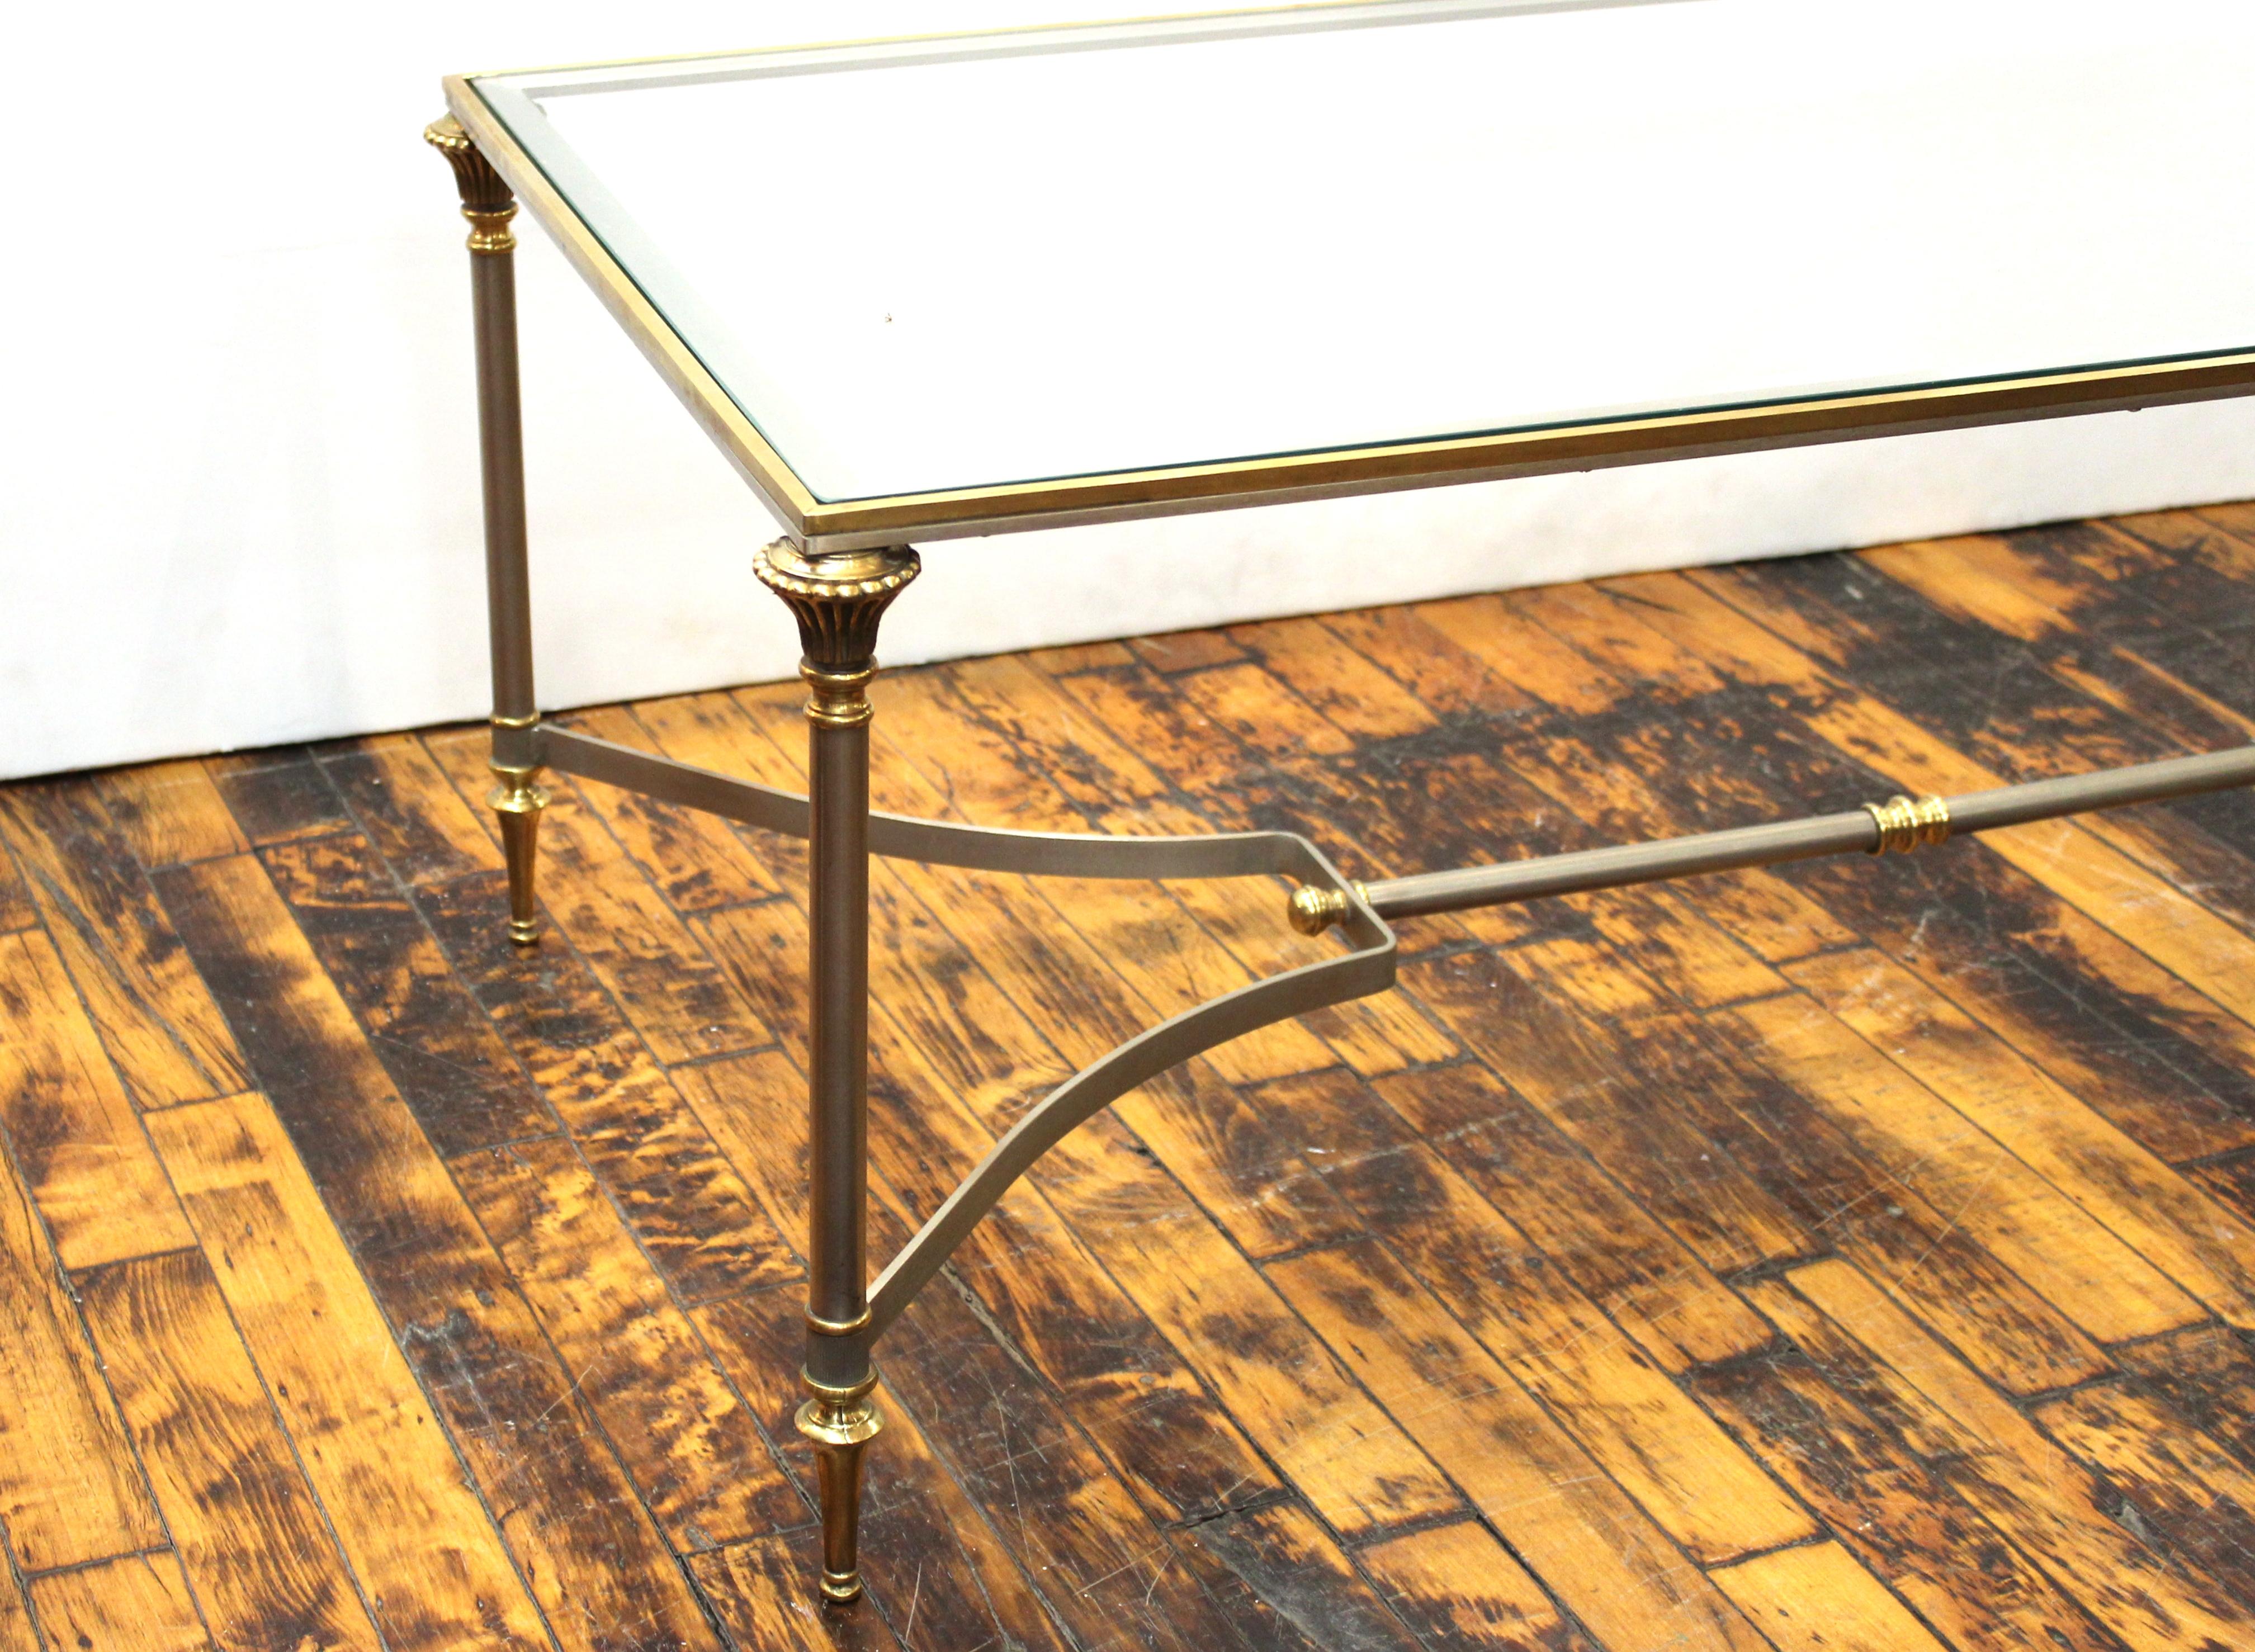 French Neoclassical style Maison Jansen coffee table with stretcher underneath and heavy glass top, made in France during the 1940s, in very good condition with age-appropriate wear and use.